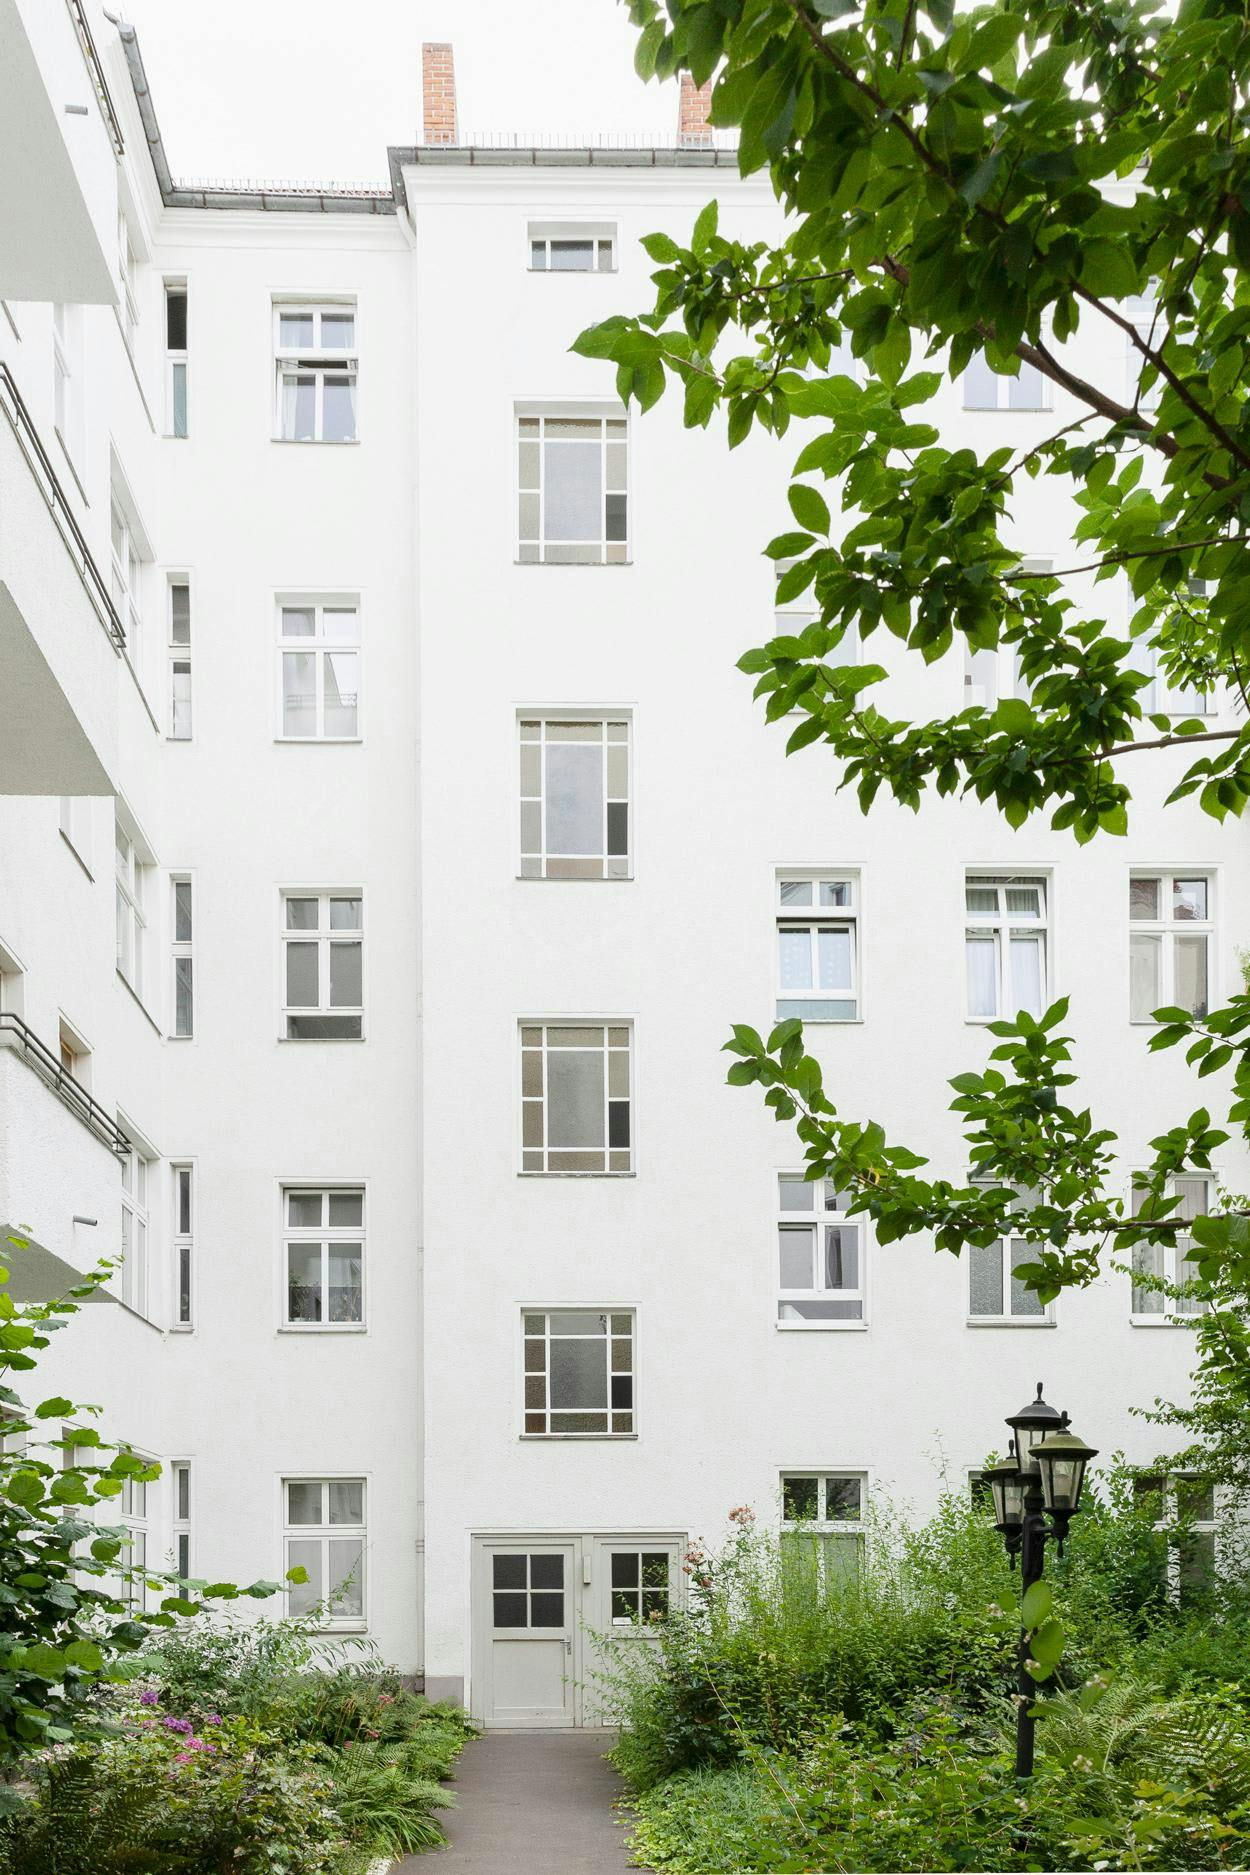 A large white building with many windows is situated next to a lush green garden, with a tree in front of it.